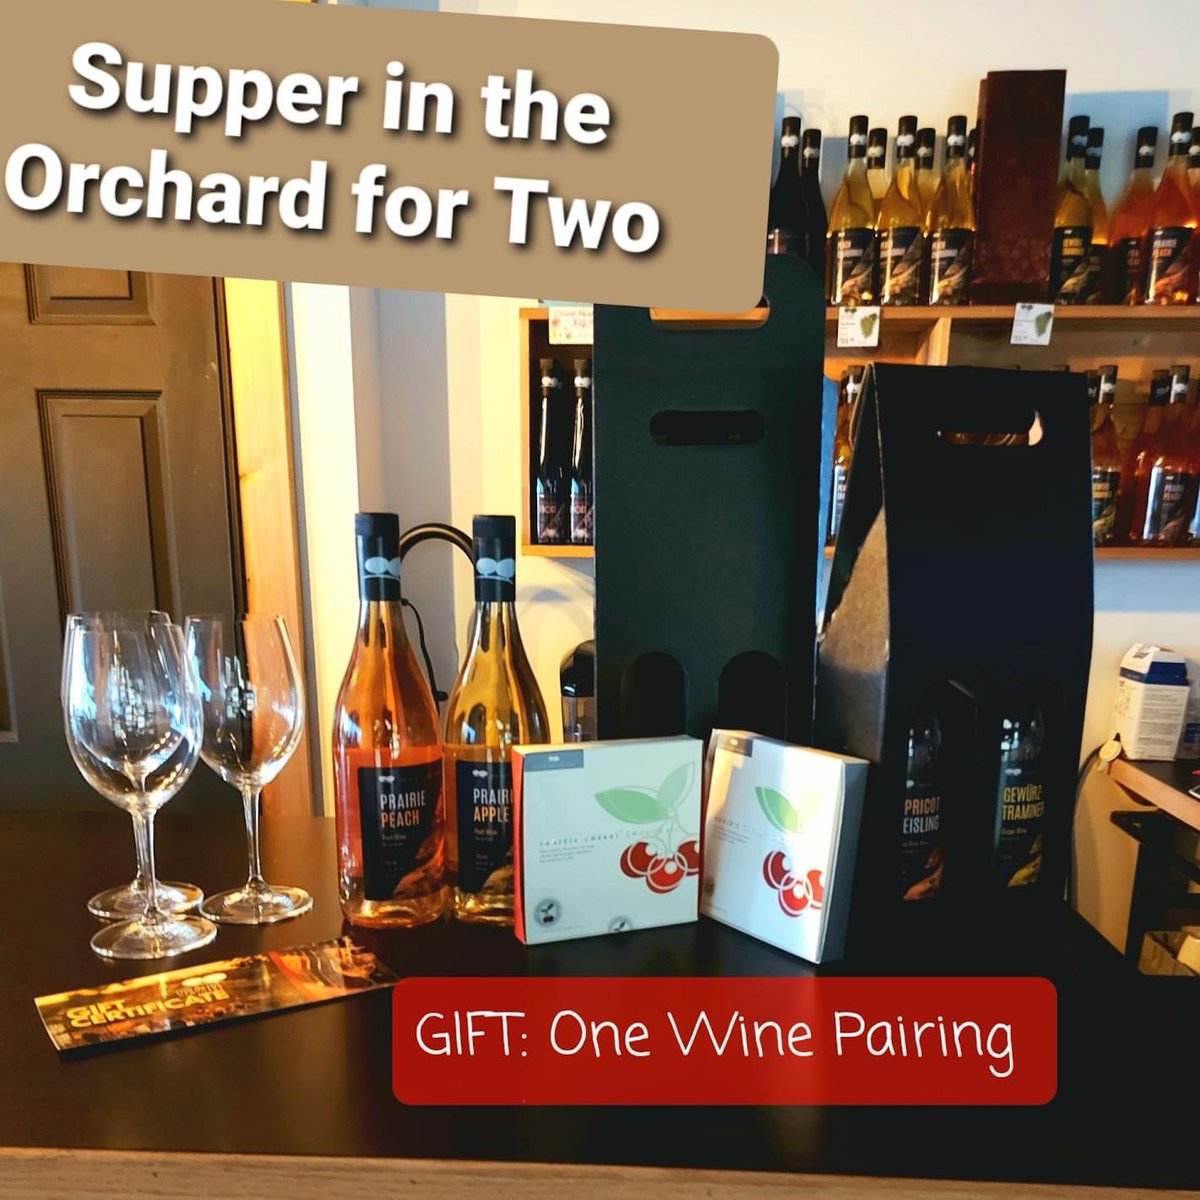 OUR CHRISTMAS GIFT CERTIFICATE SPECIAL IS BACK! Buy a gift certificate for 2 suppers ($155.40) and receive a free wine pairing for 1($25 value). Call Sylvia 306-535-1278 overthehillorchards.ca/contact-us/ #supperintheorchard #winery #orchard #prairiecherry #yqr #regina #yqrfood #lumsden